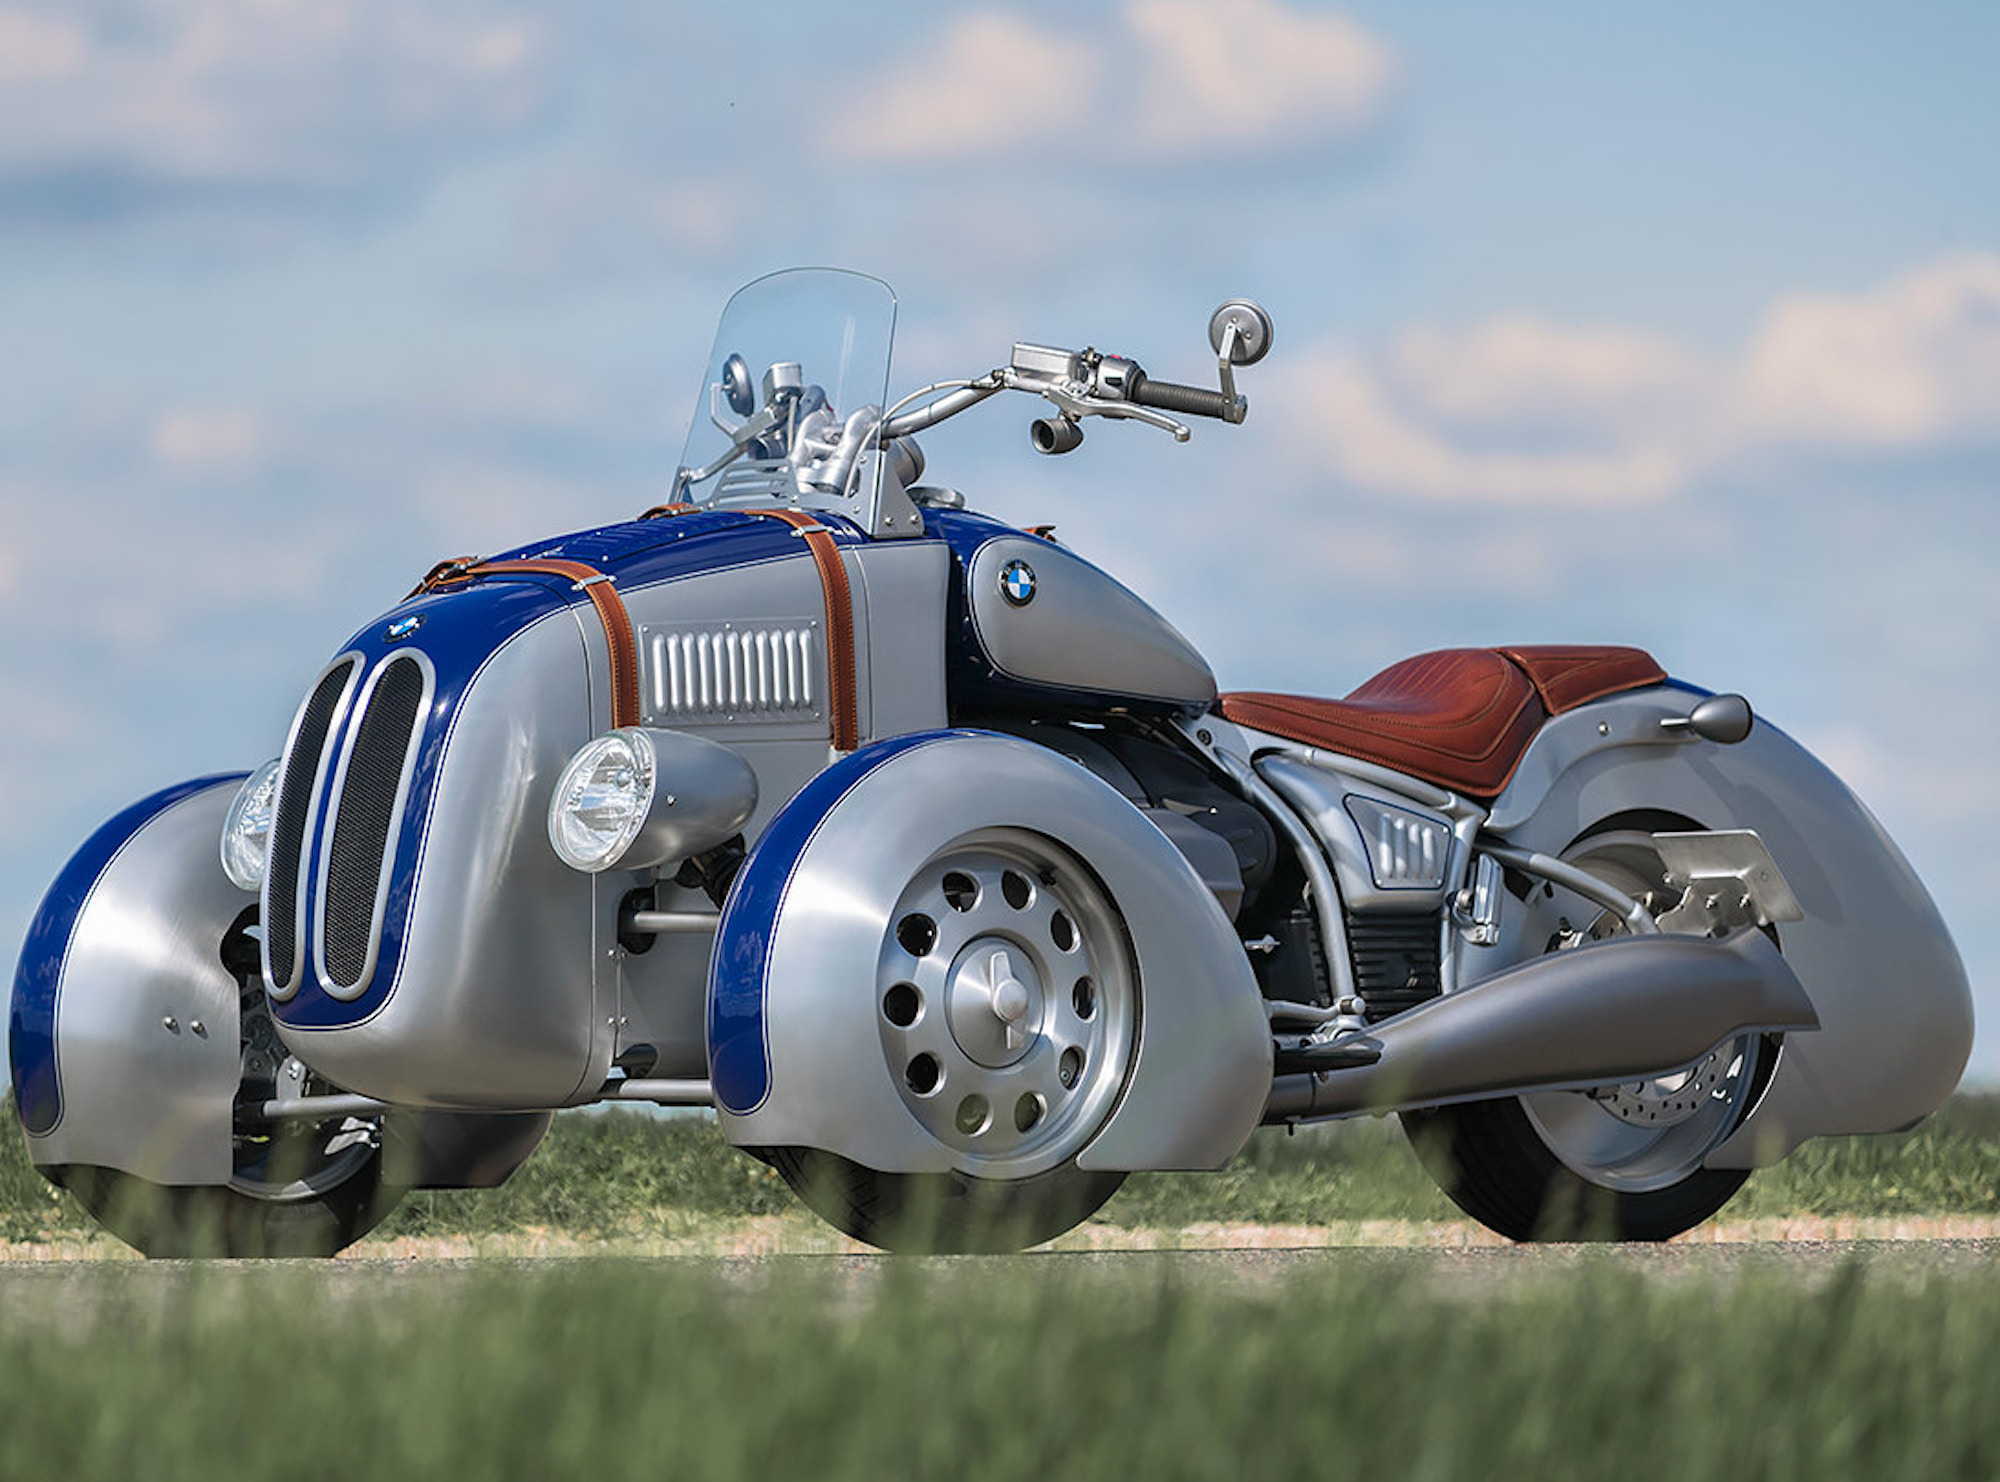 ShifCustoms' rendering of a three-wheeled R 18, inspired by a vintage 328. Media sourced from BikeEXIF.